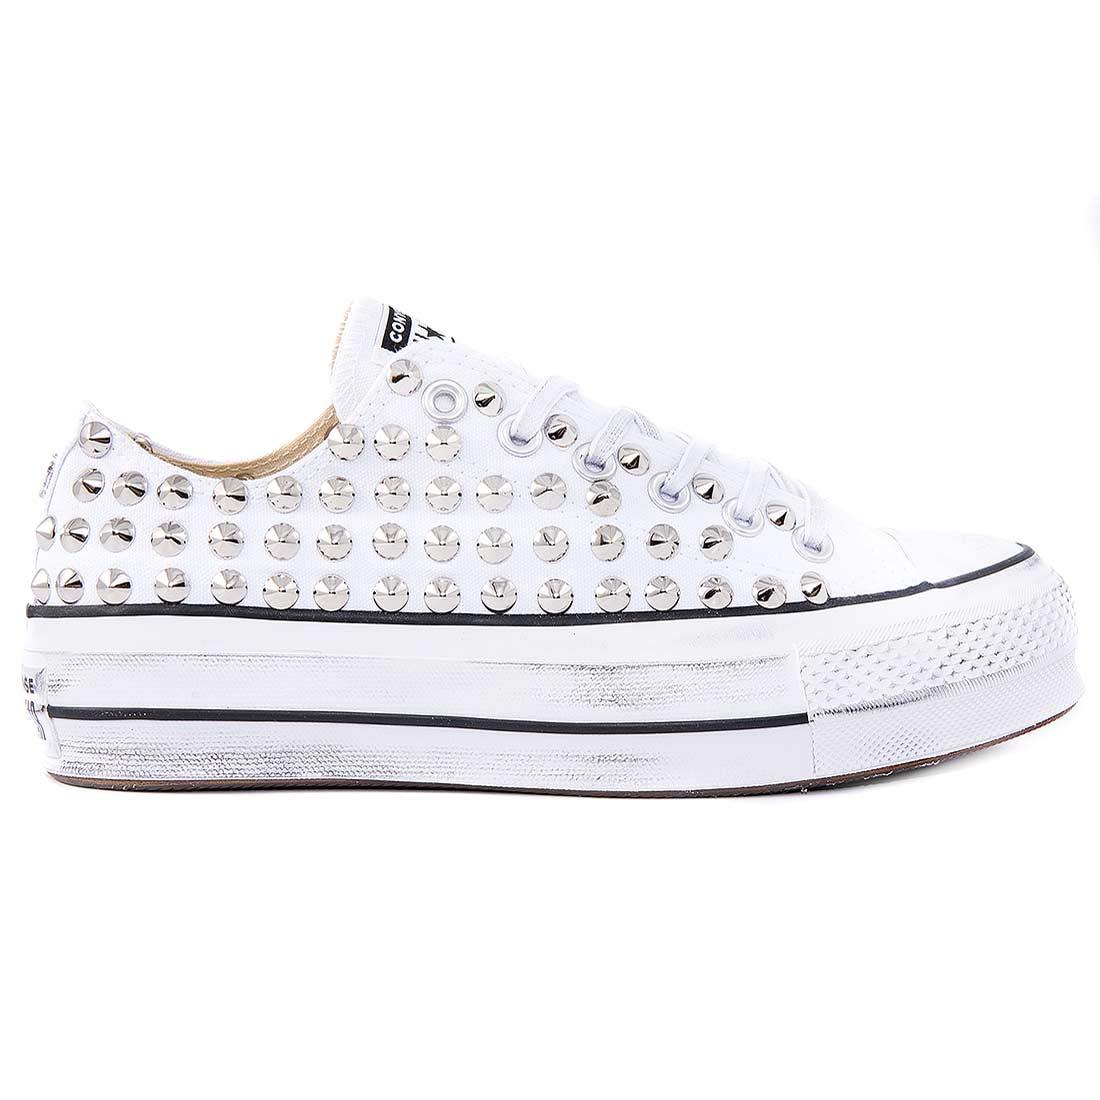 All-Star-borchie-Platform-basse-bianche-Converse-Personalizzate-Racoon-LAB